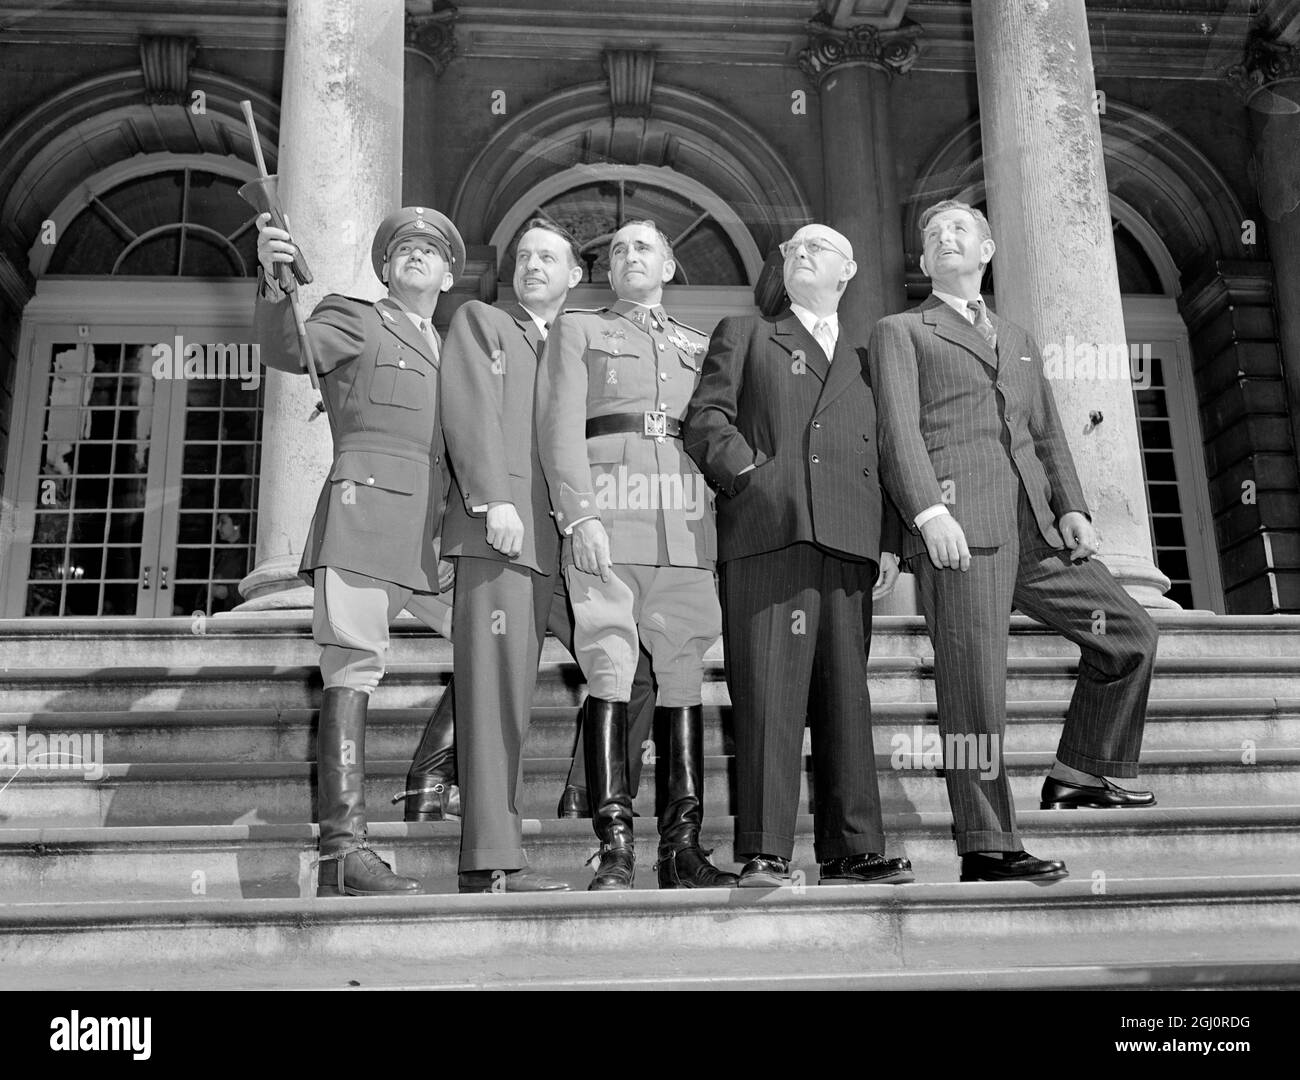 Captains of Five International Showjumping teams to compete at Madison Square Garden view the New York scene from the steps of the City Hall , New York , USA . LtoR Brigadier General Humberto Mariles of Mexico ; WR Ballard of Canada ; Lt Col Valentin Bulnes of Spain ; Dr Gustav Rau of West Germany and Arthur McCashin of the United States . 2 November 1954 Stock Photo